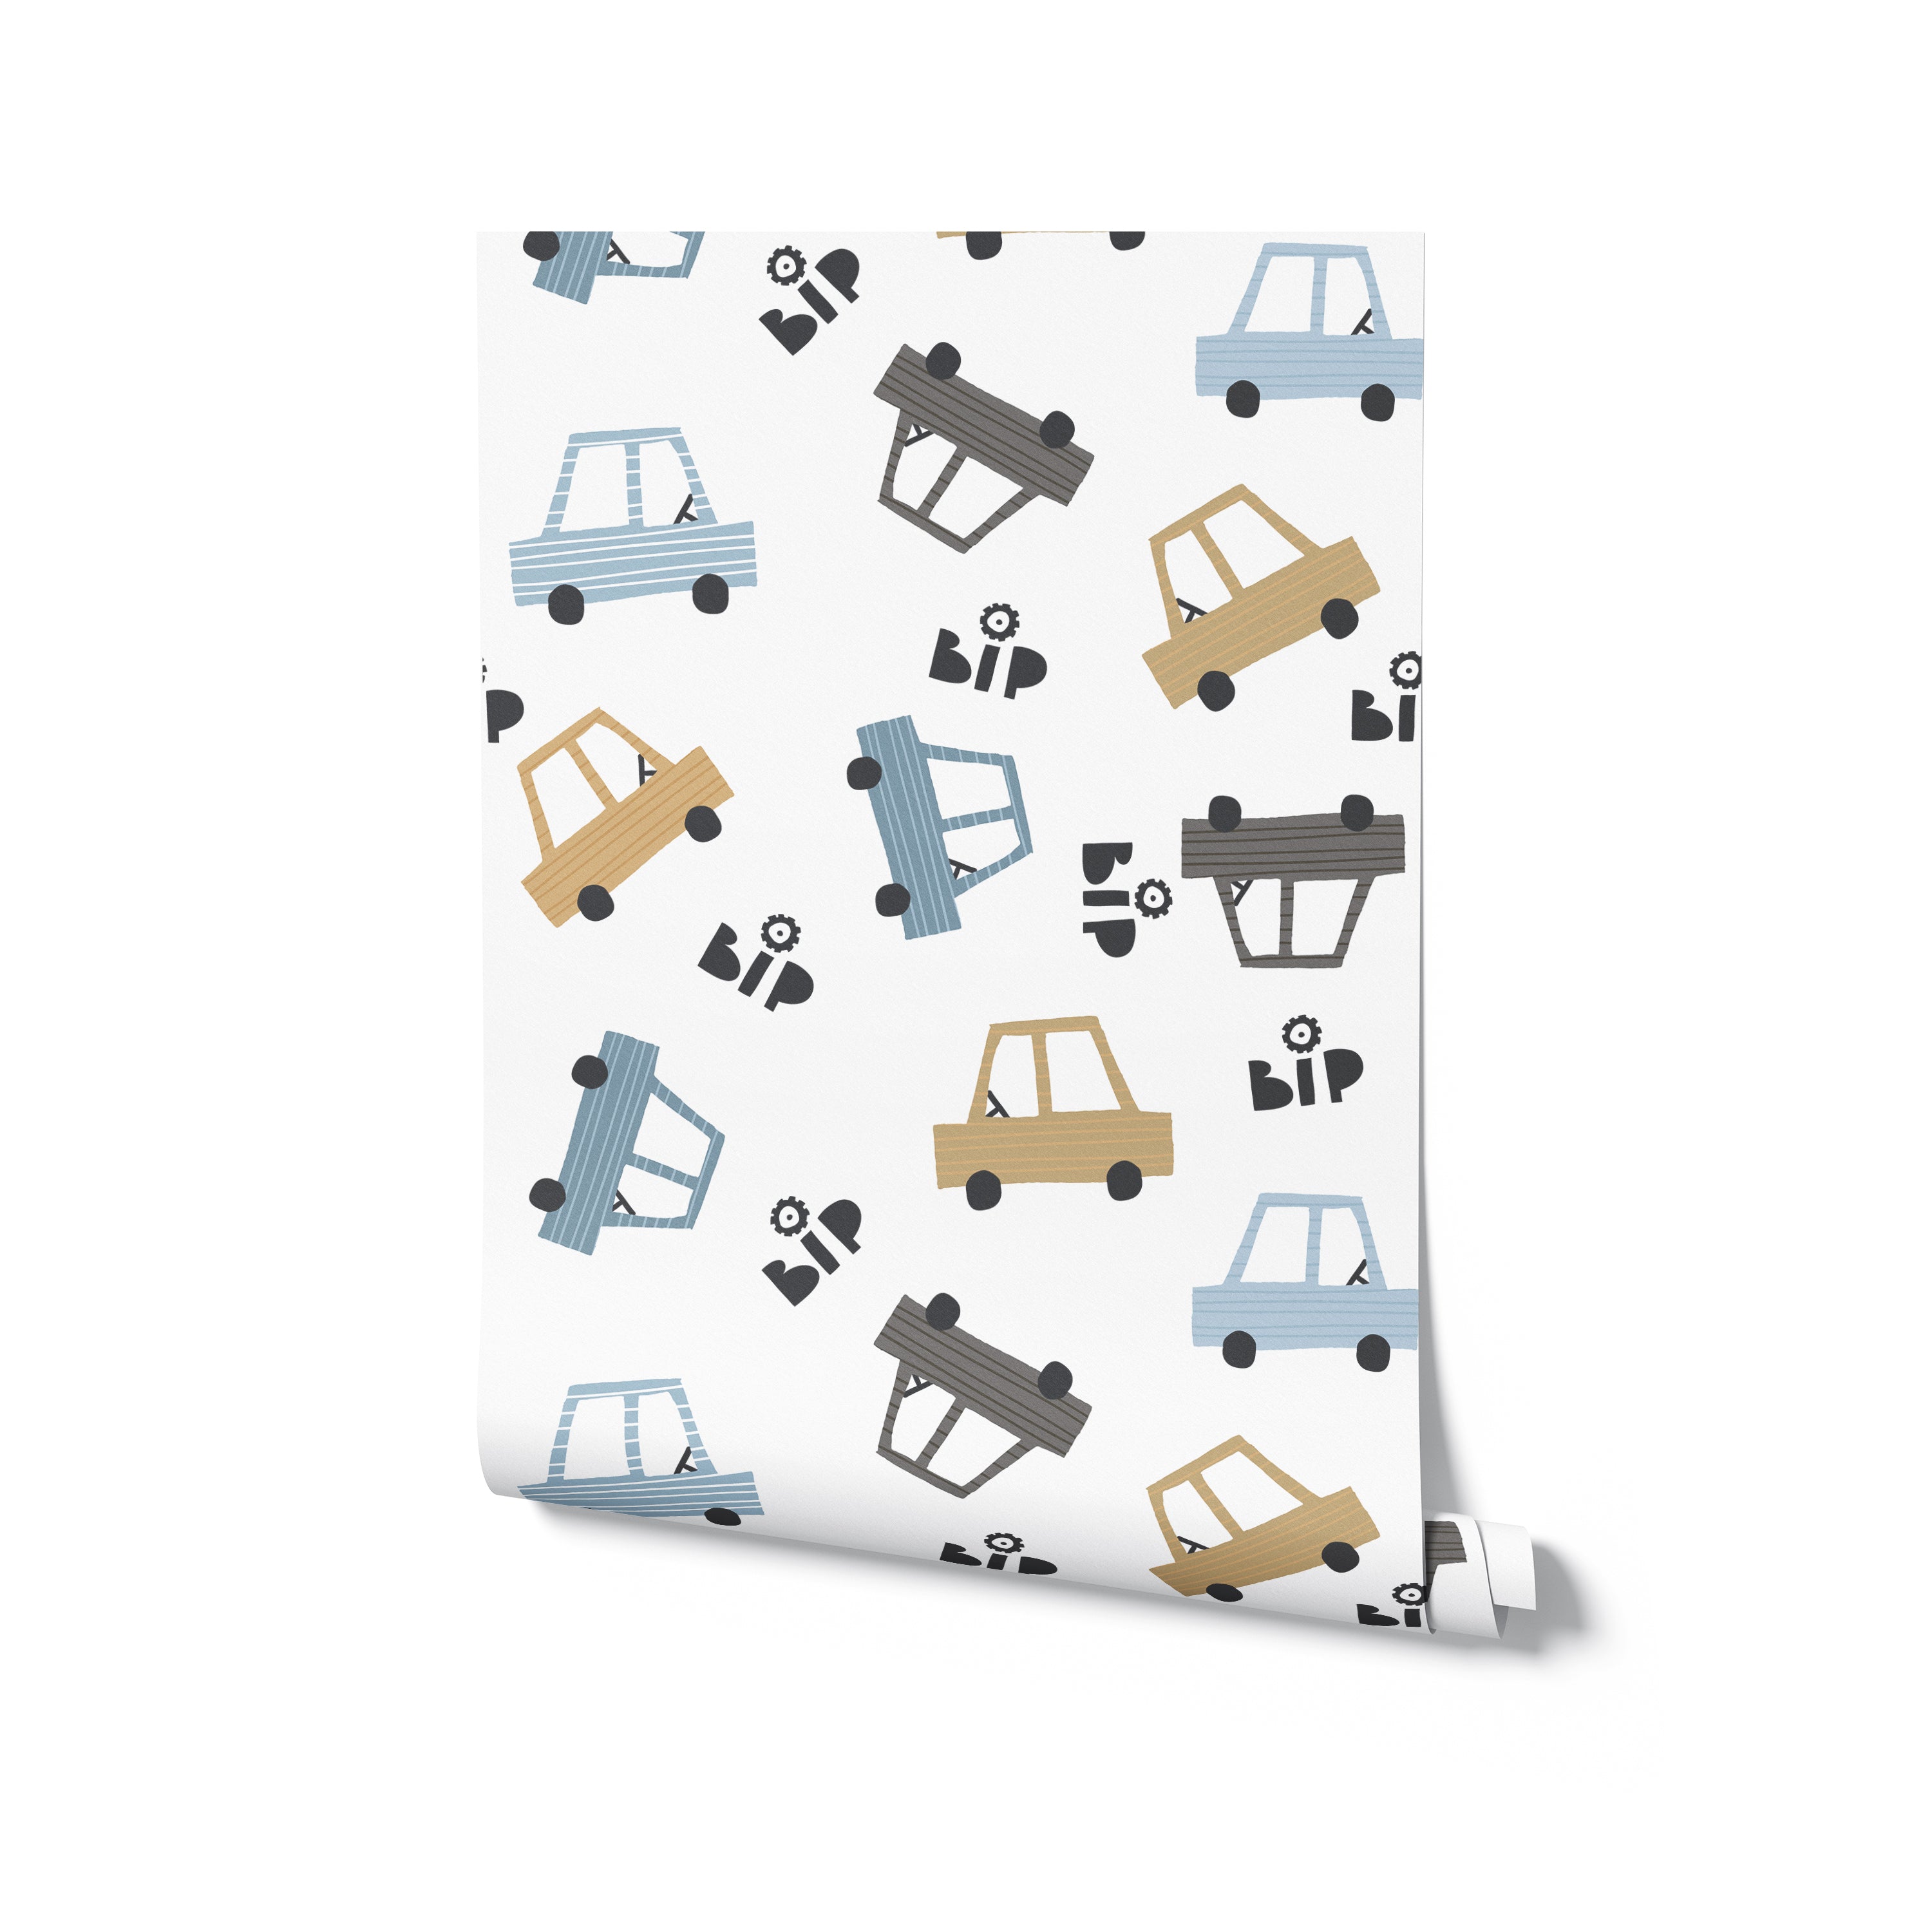 Close-up view of Toy Cars Wallpaper showing a whimsical design of various toy cars in blue, yellow, and gray colors. The cars are depicted in a cute, cartoonish style, making it a charming choice for a child's room decor.